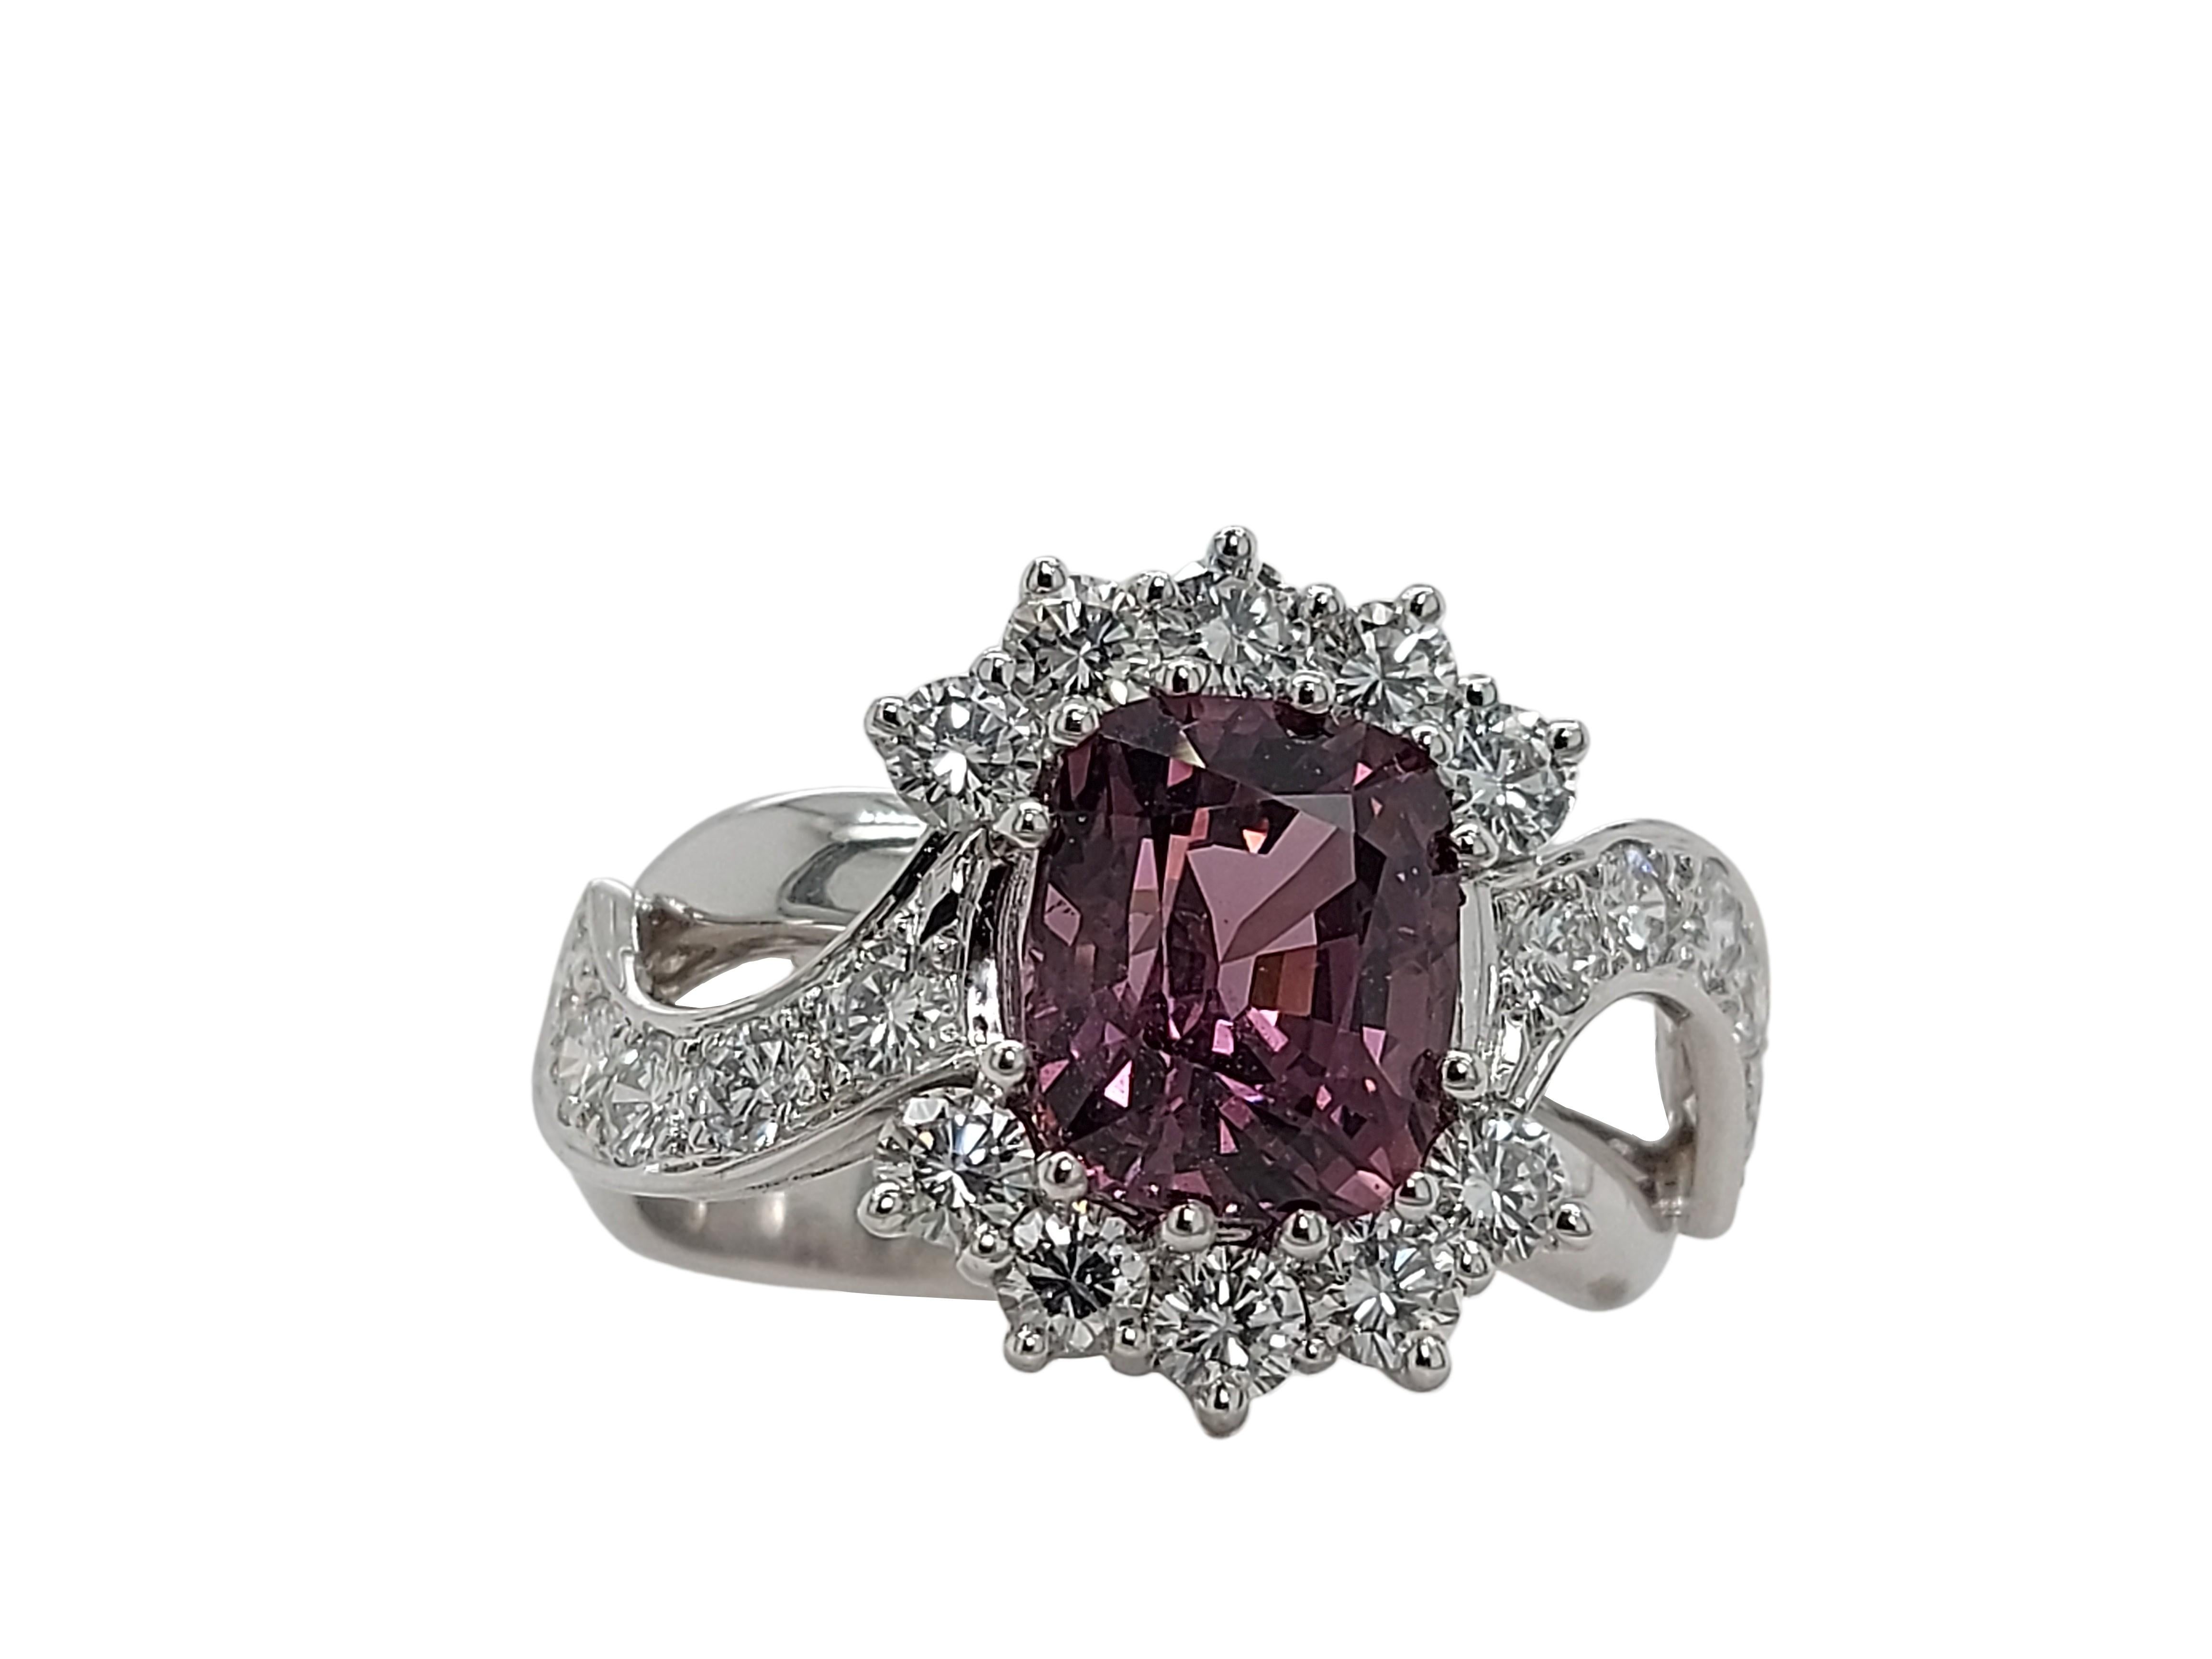 Brilliant Cut 18kt White Gold Ring with a 3.25 Ct No Heat Spinel Stone and 1.2ct Diamonds For Sale